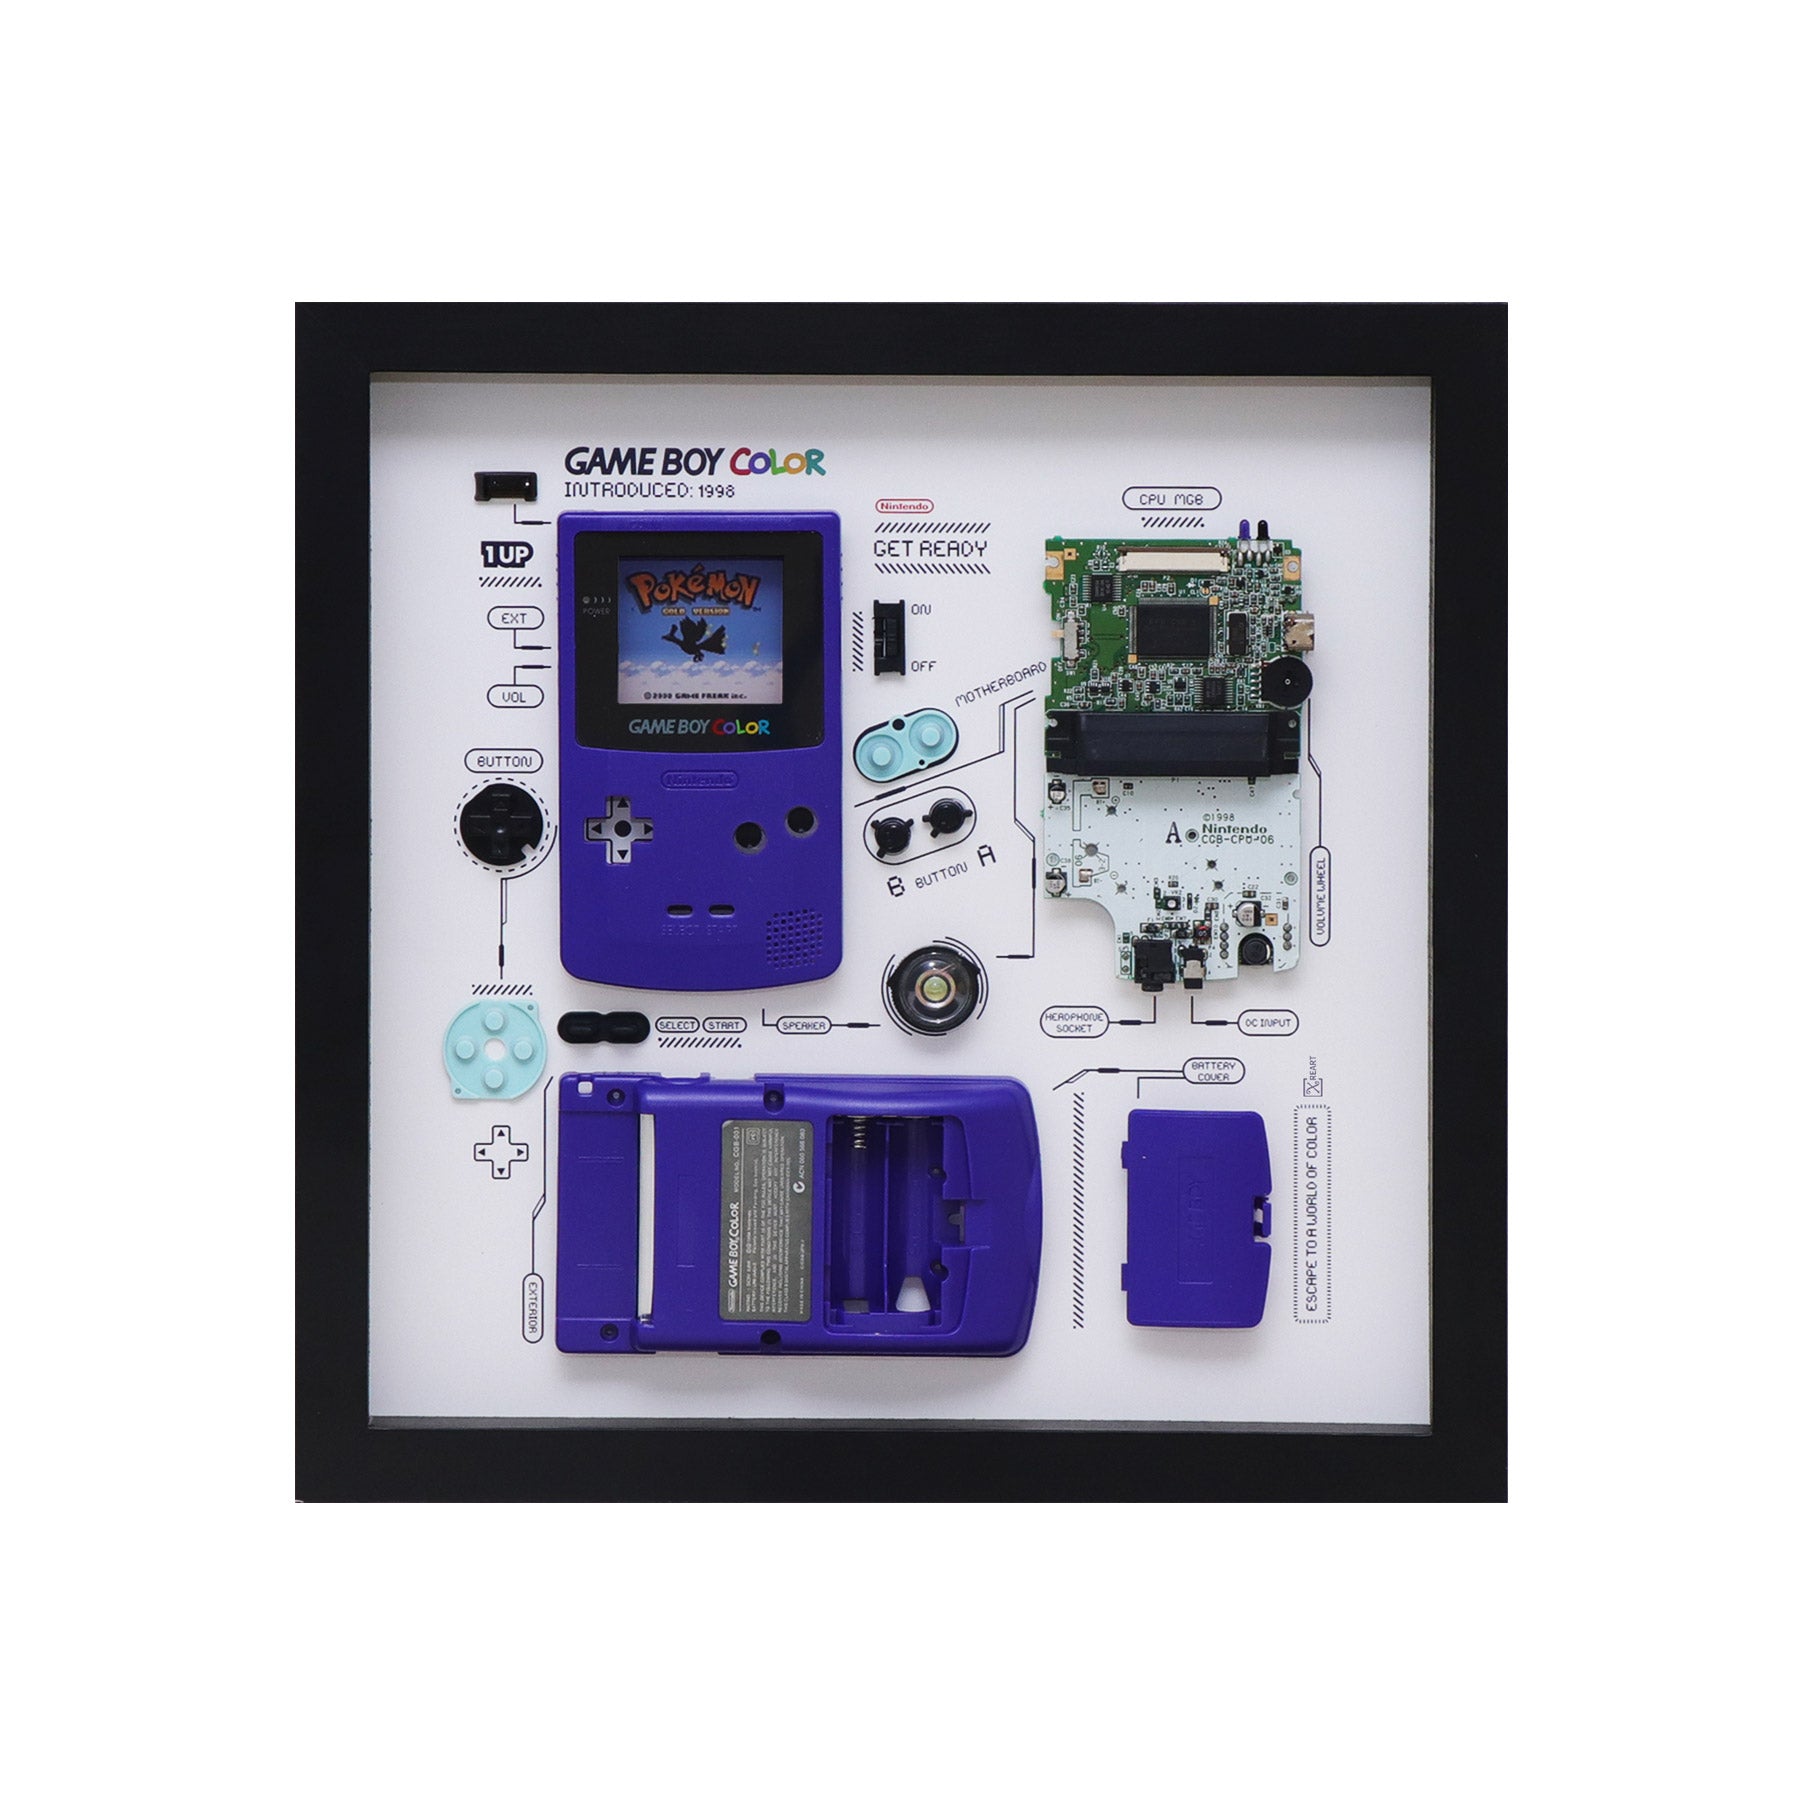 Xreart GameBoy Colour Frame - The Usual